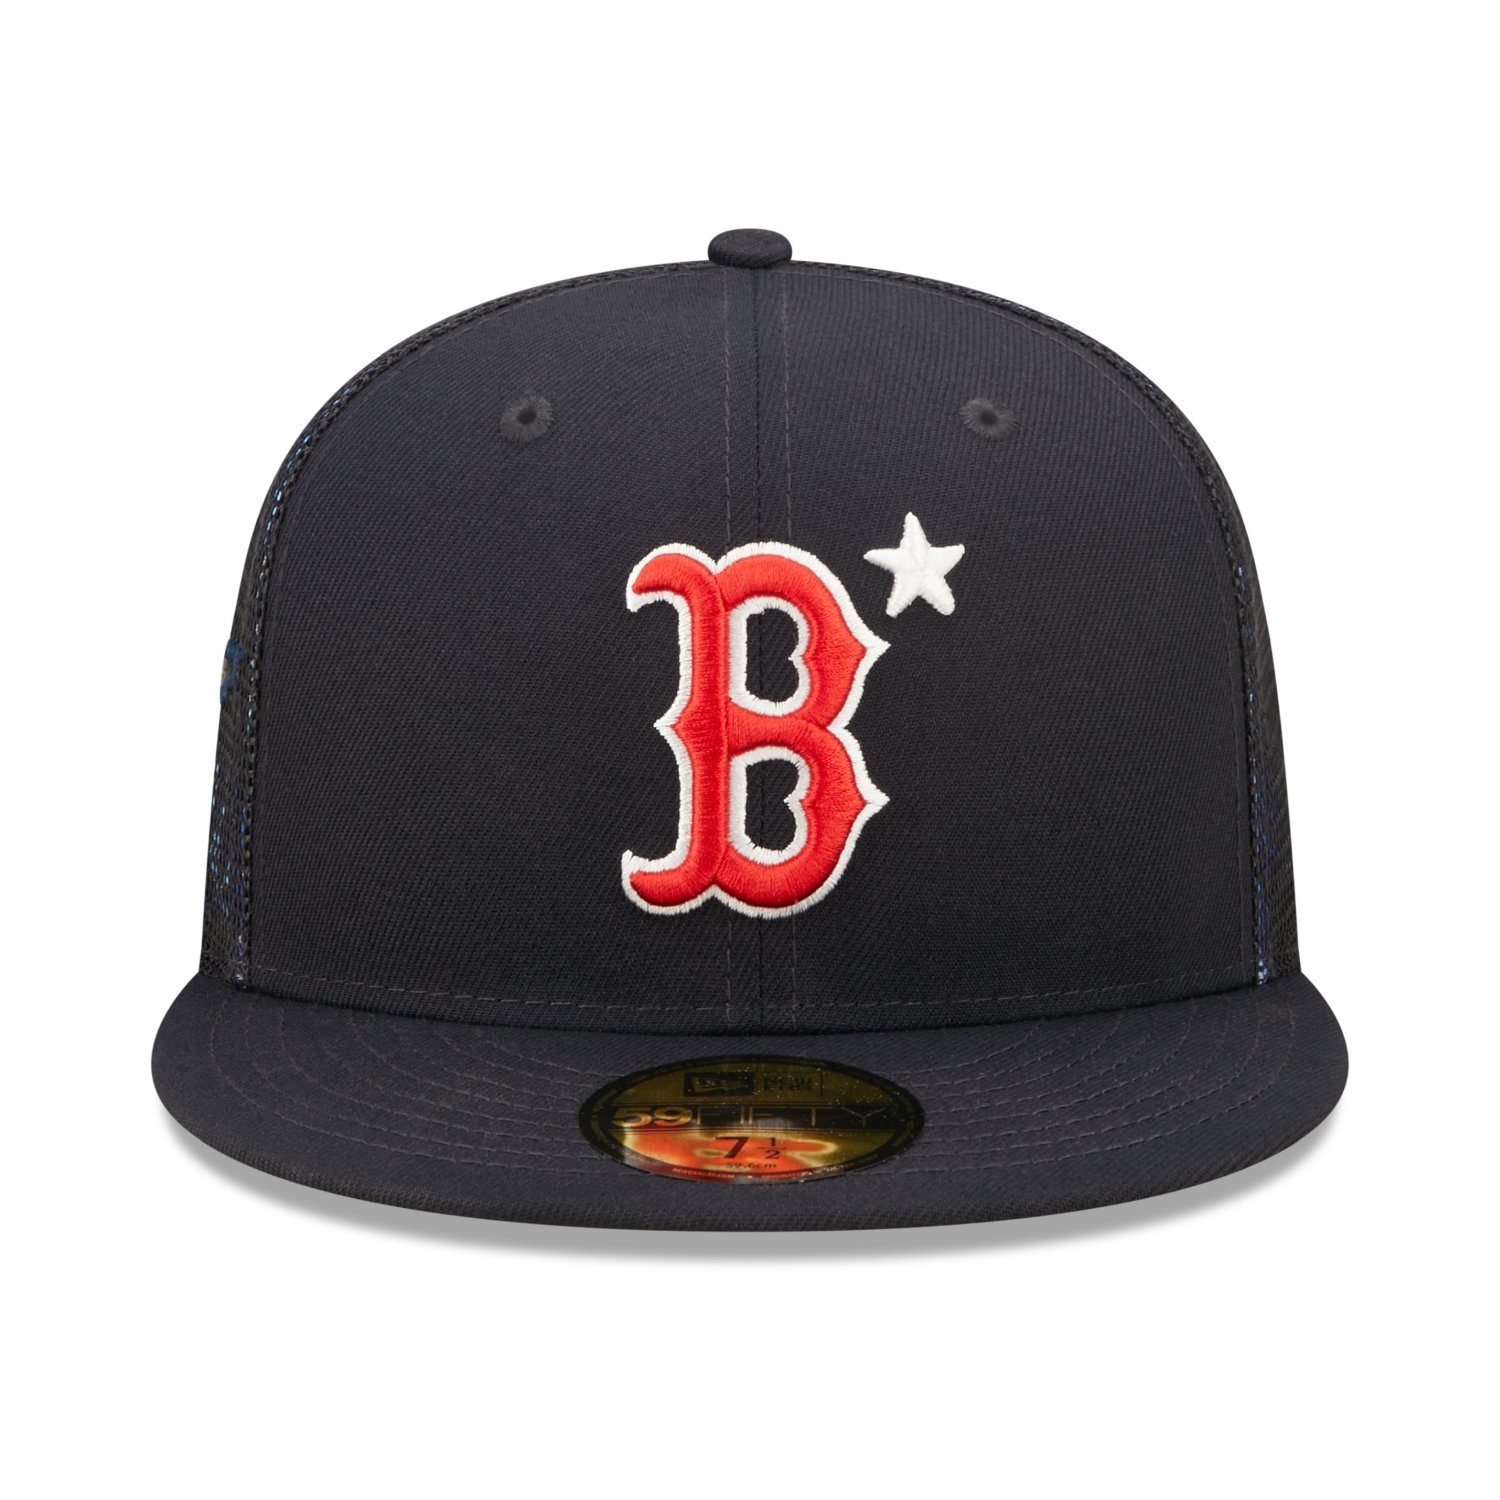 New Era 59Fifty GAME ALLSTAR Red Sox Cap Boston Fitted